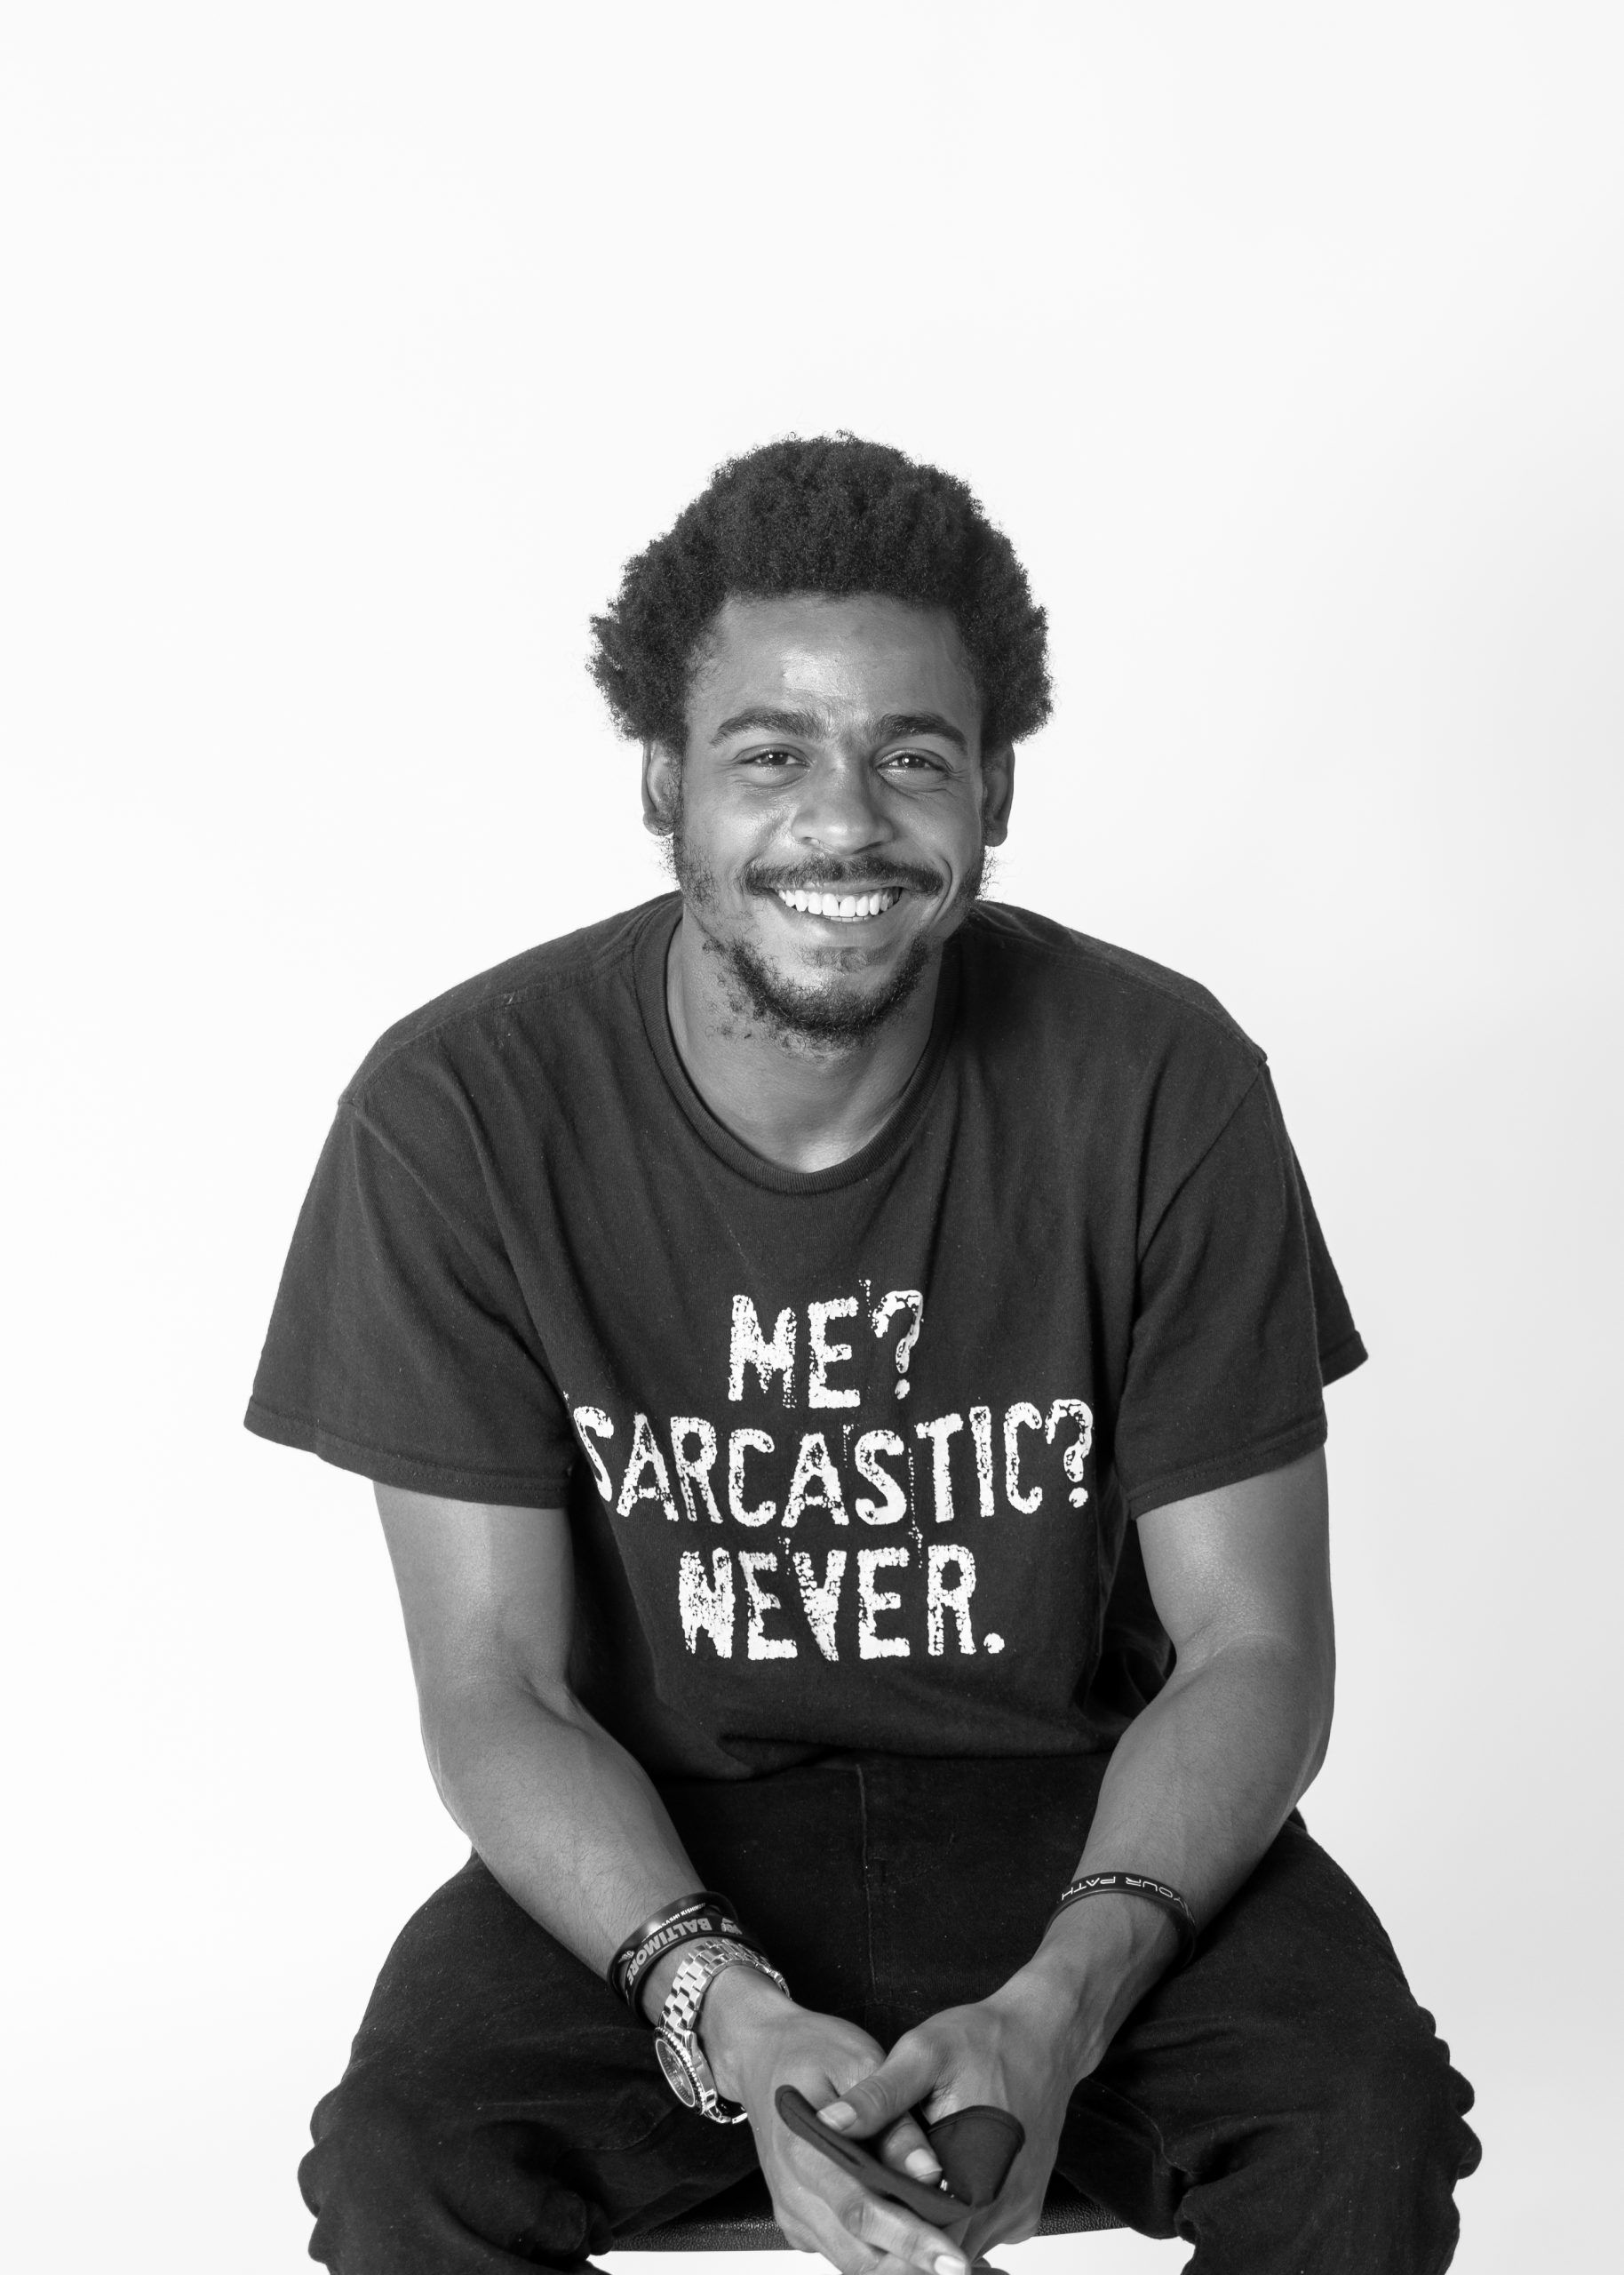 A black and white photo of a Black man smiling wearing a t-shirt that says "Me? Sarcastic? Never."